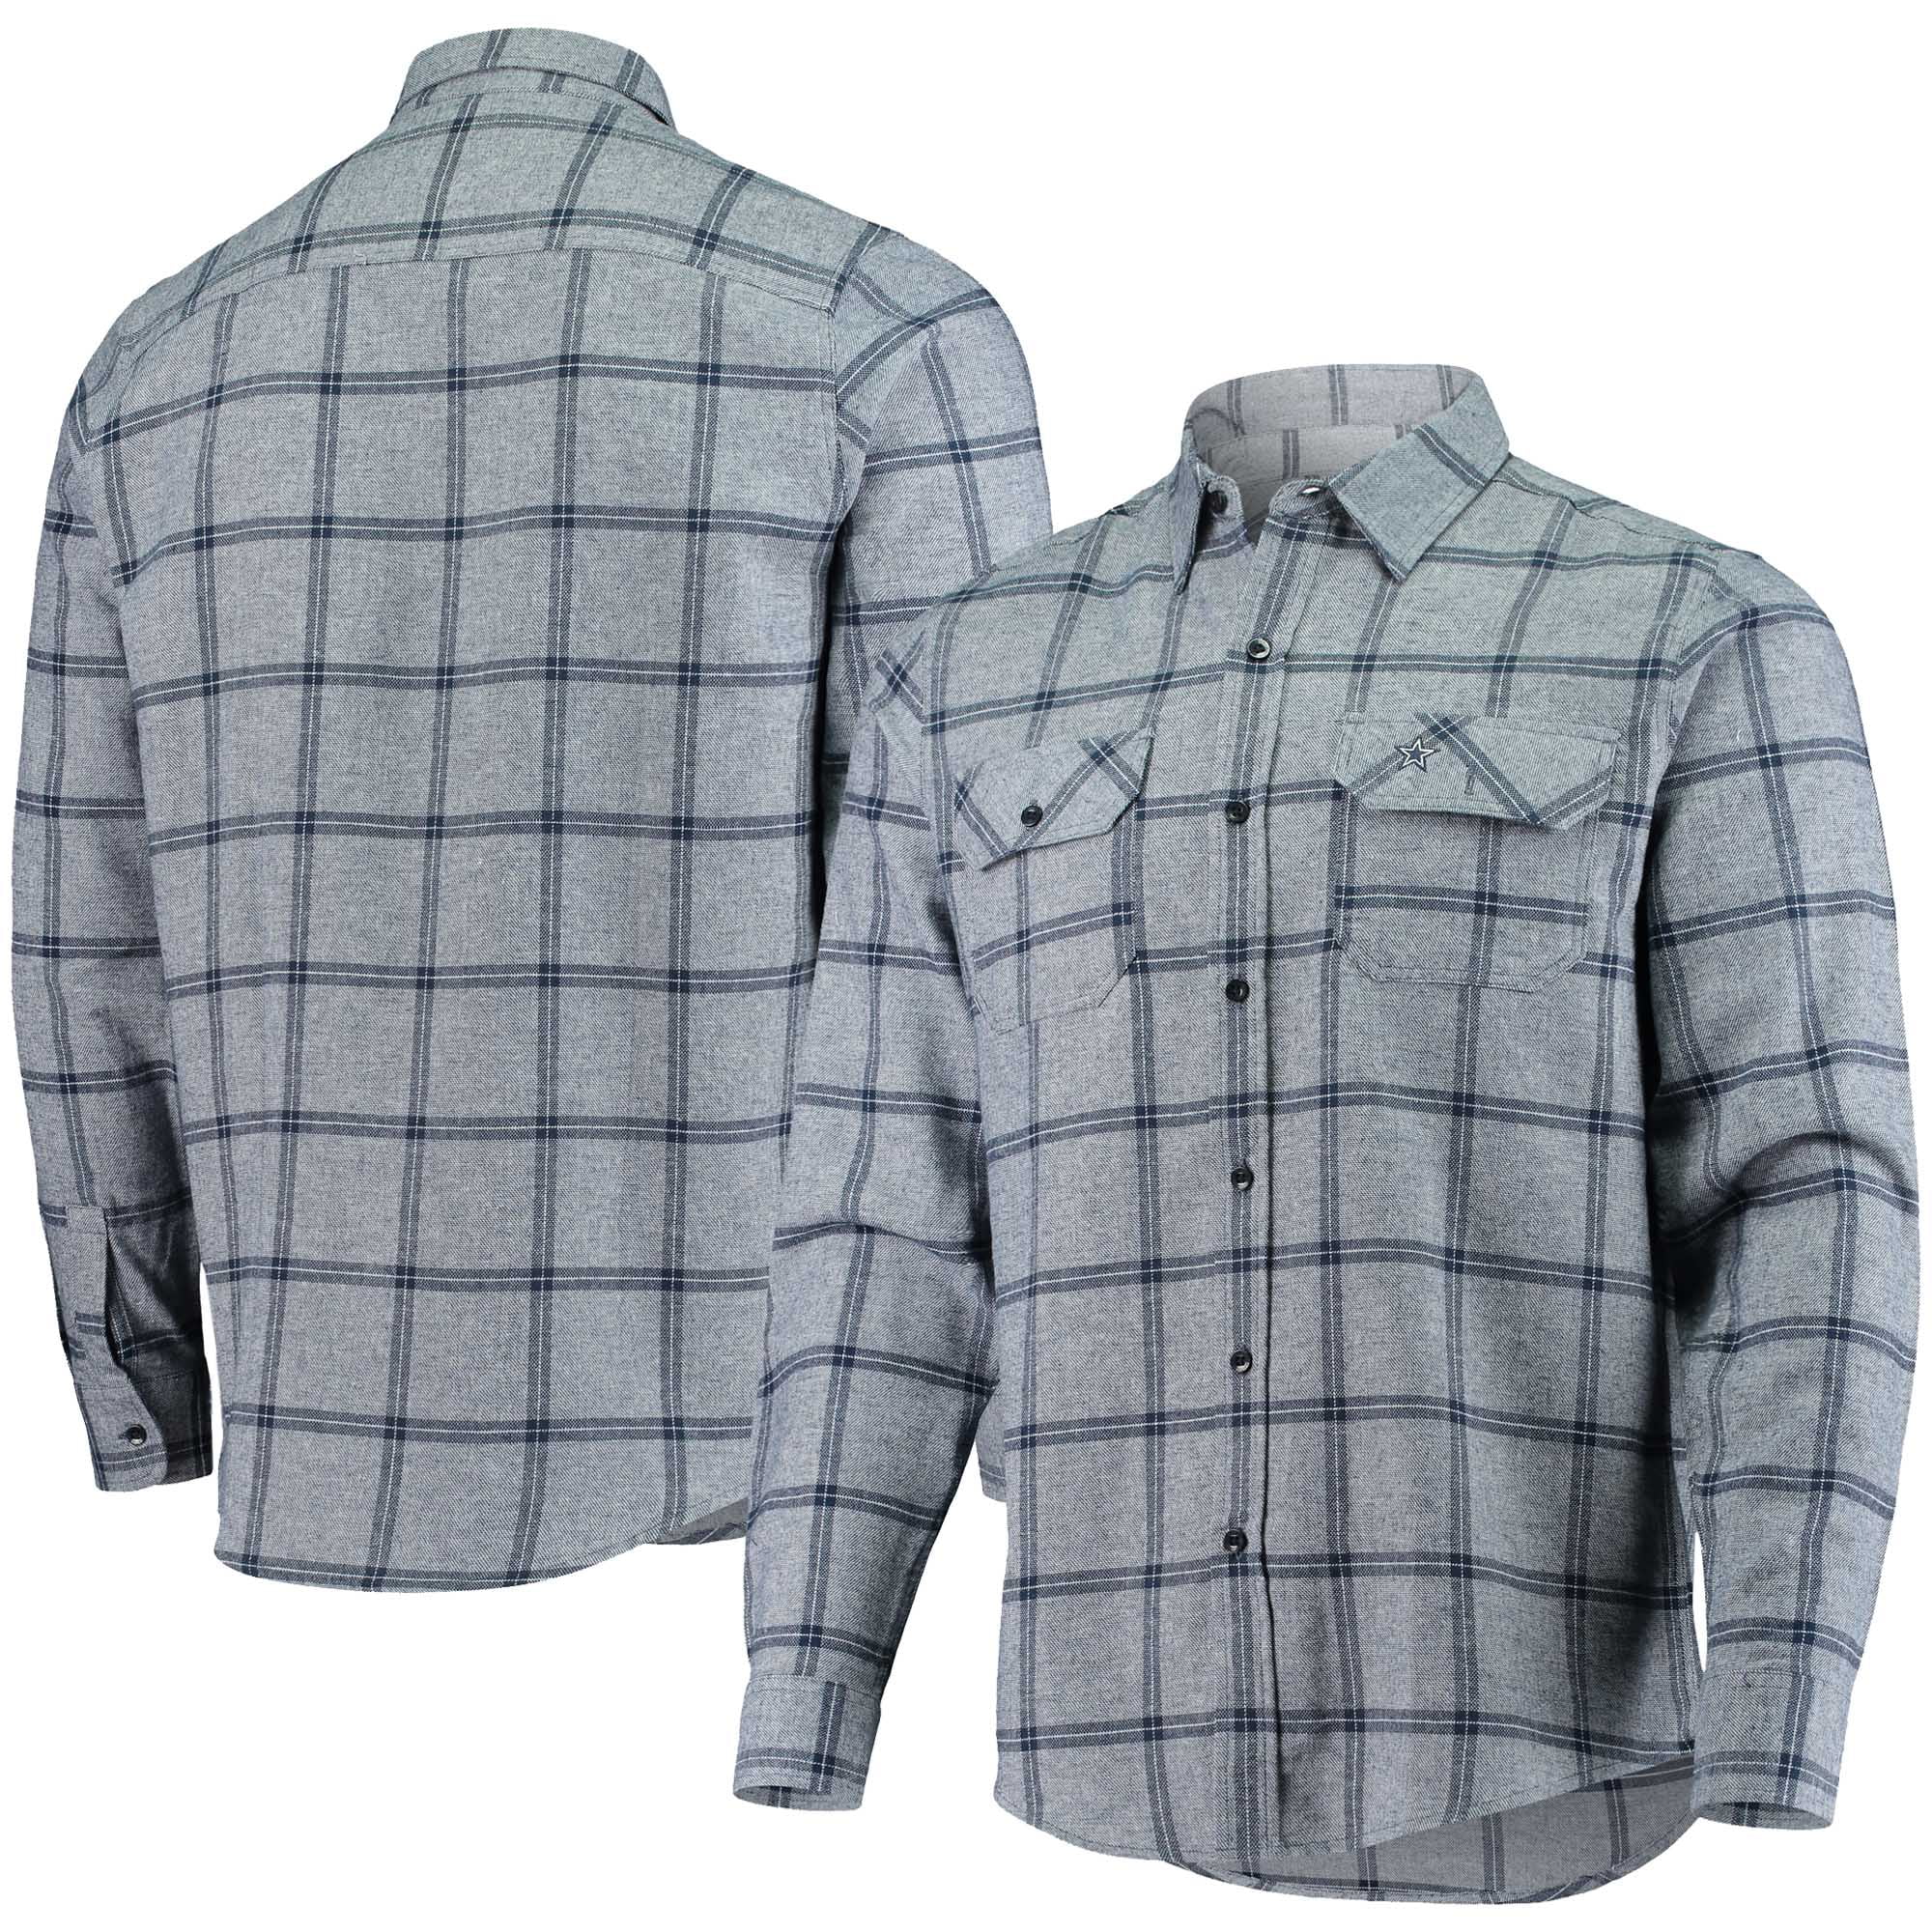 miami dolphins flannel shirt